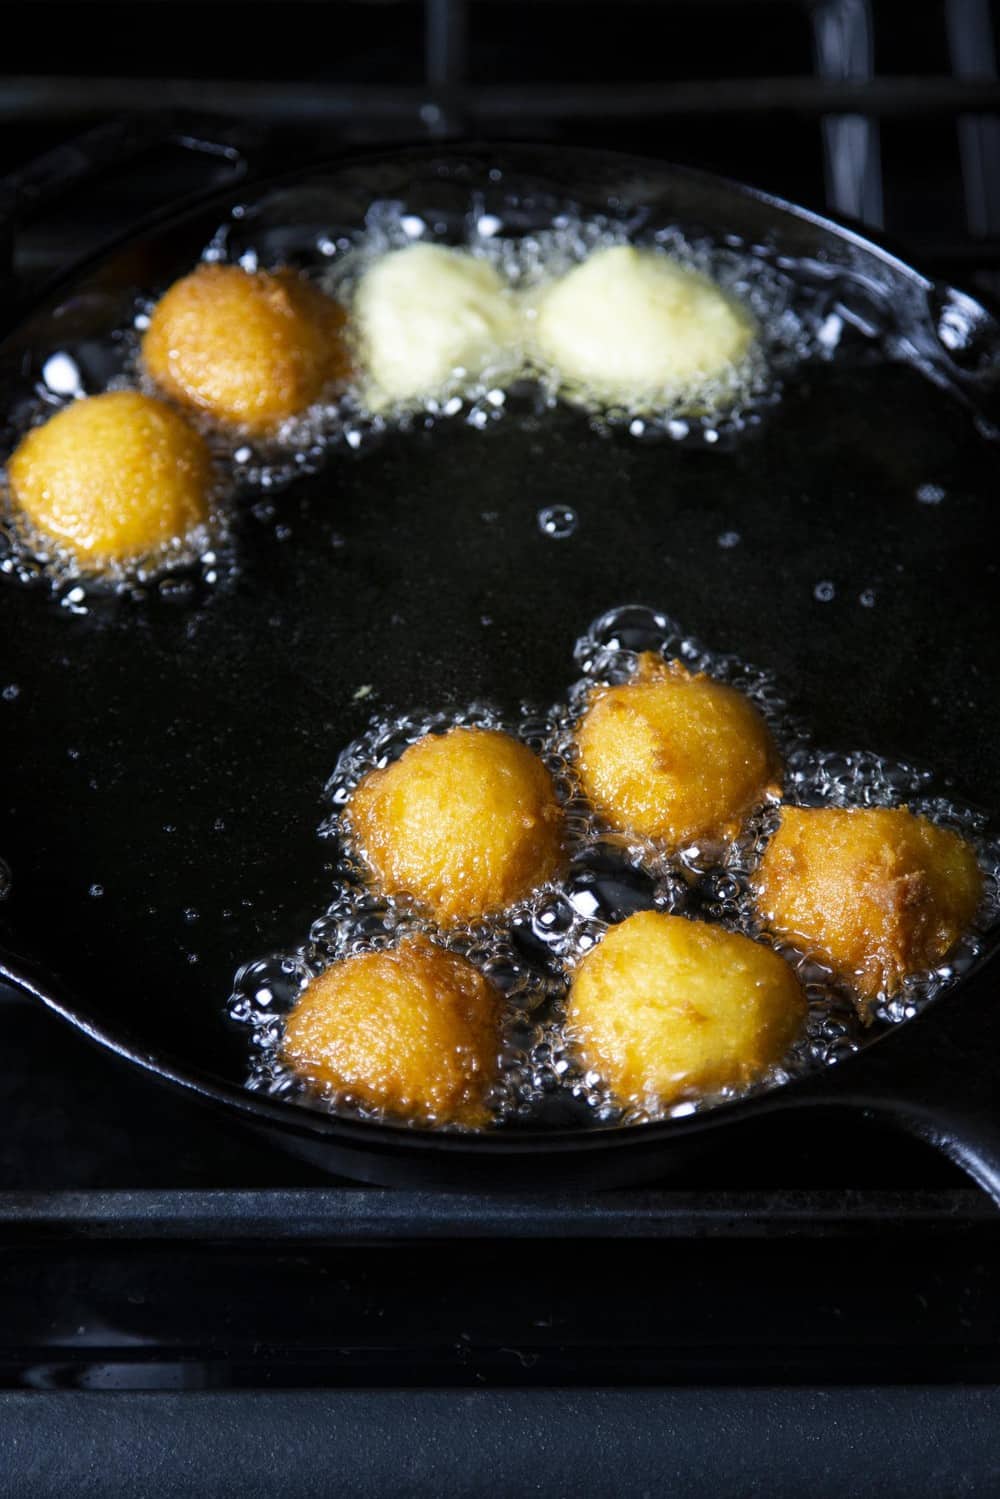 Donut holes frying in a pan of oil.